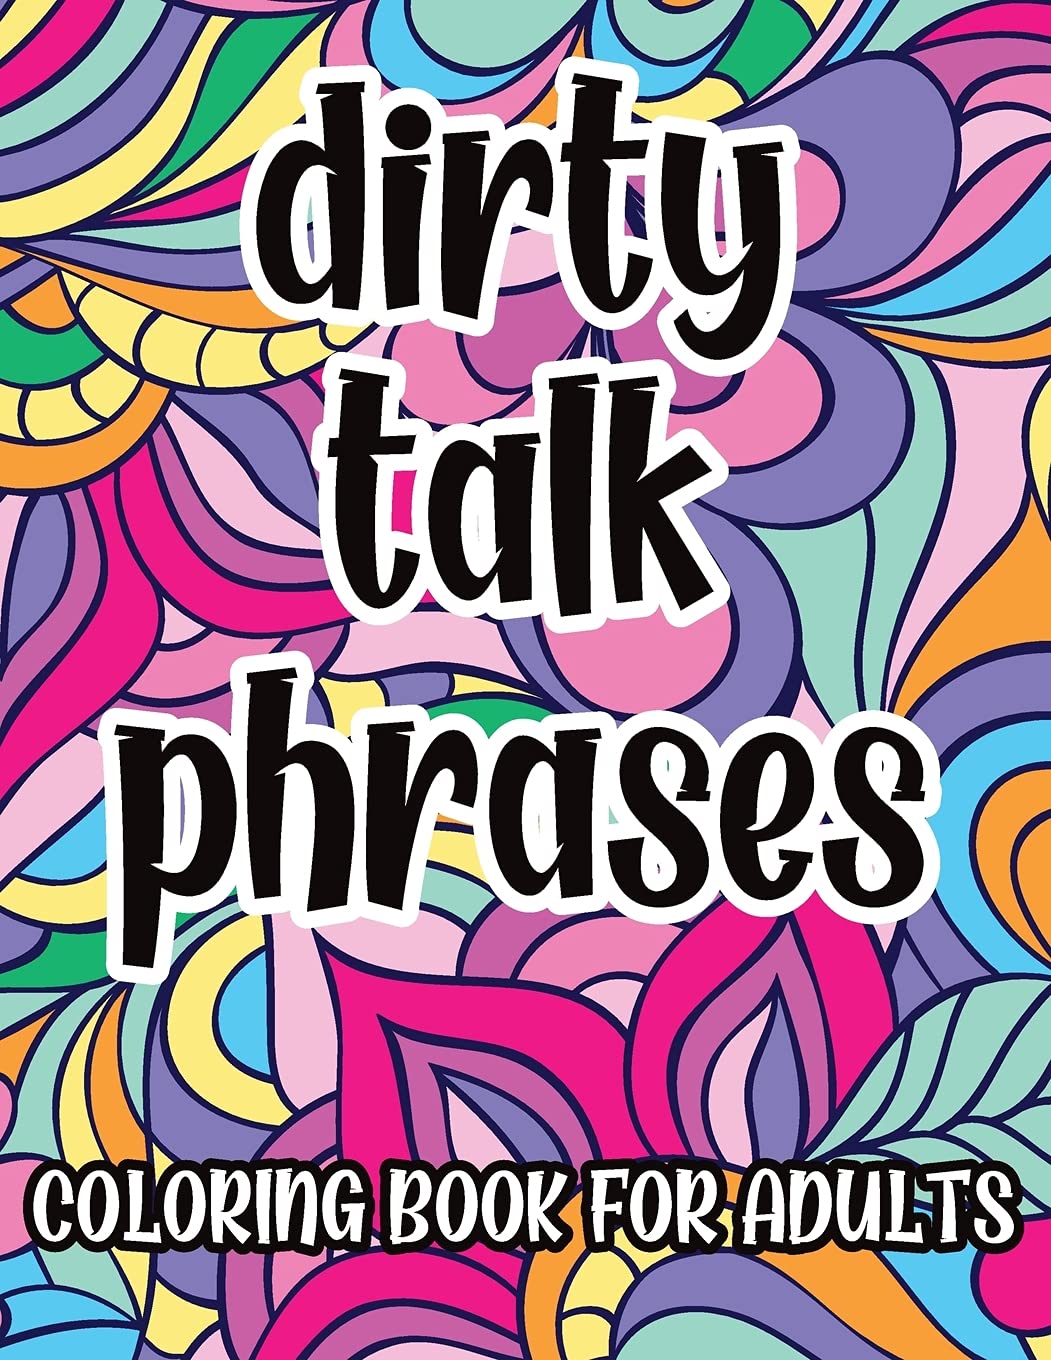 Dirty talk phrases coloring book for adults naughty and kinky coloring pages with sexy phrases for women great gift idea for her by rosa provocante press